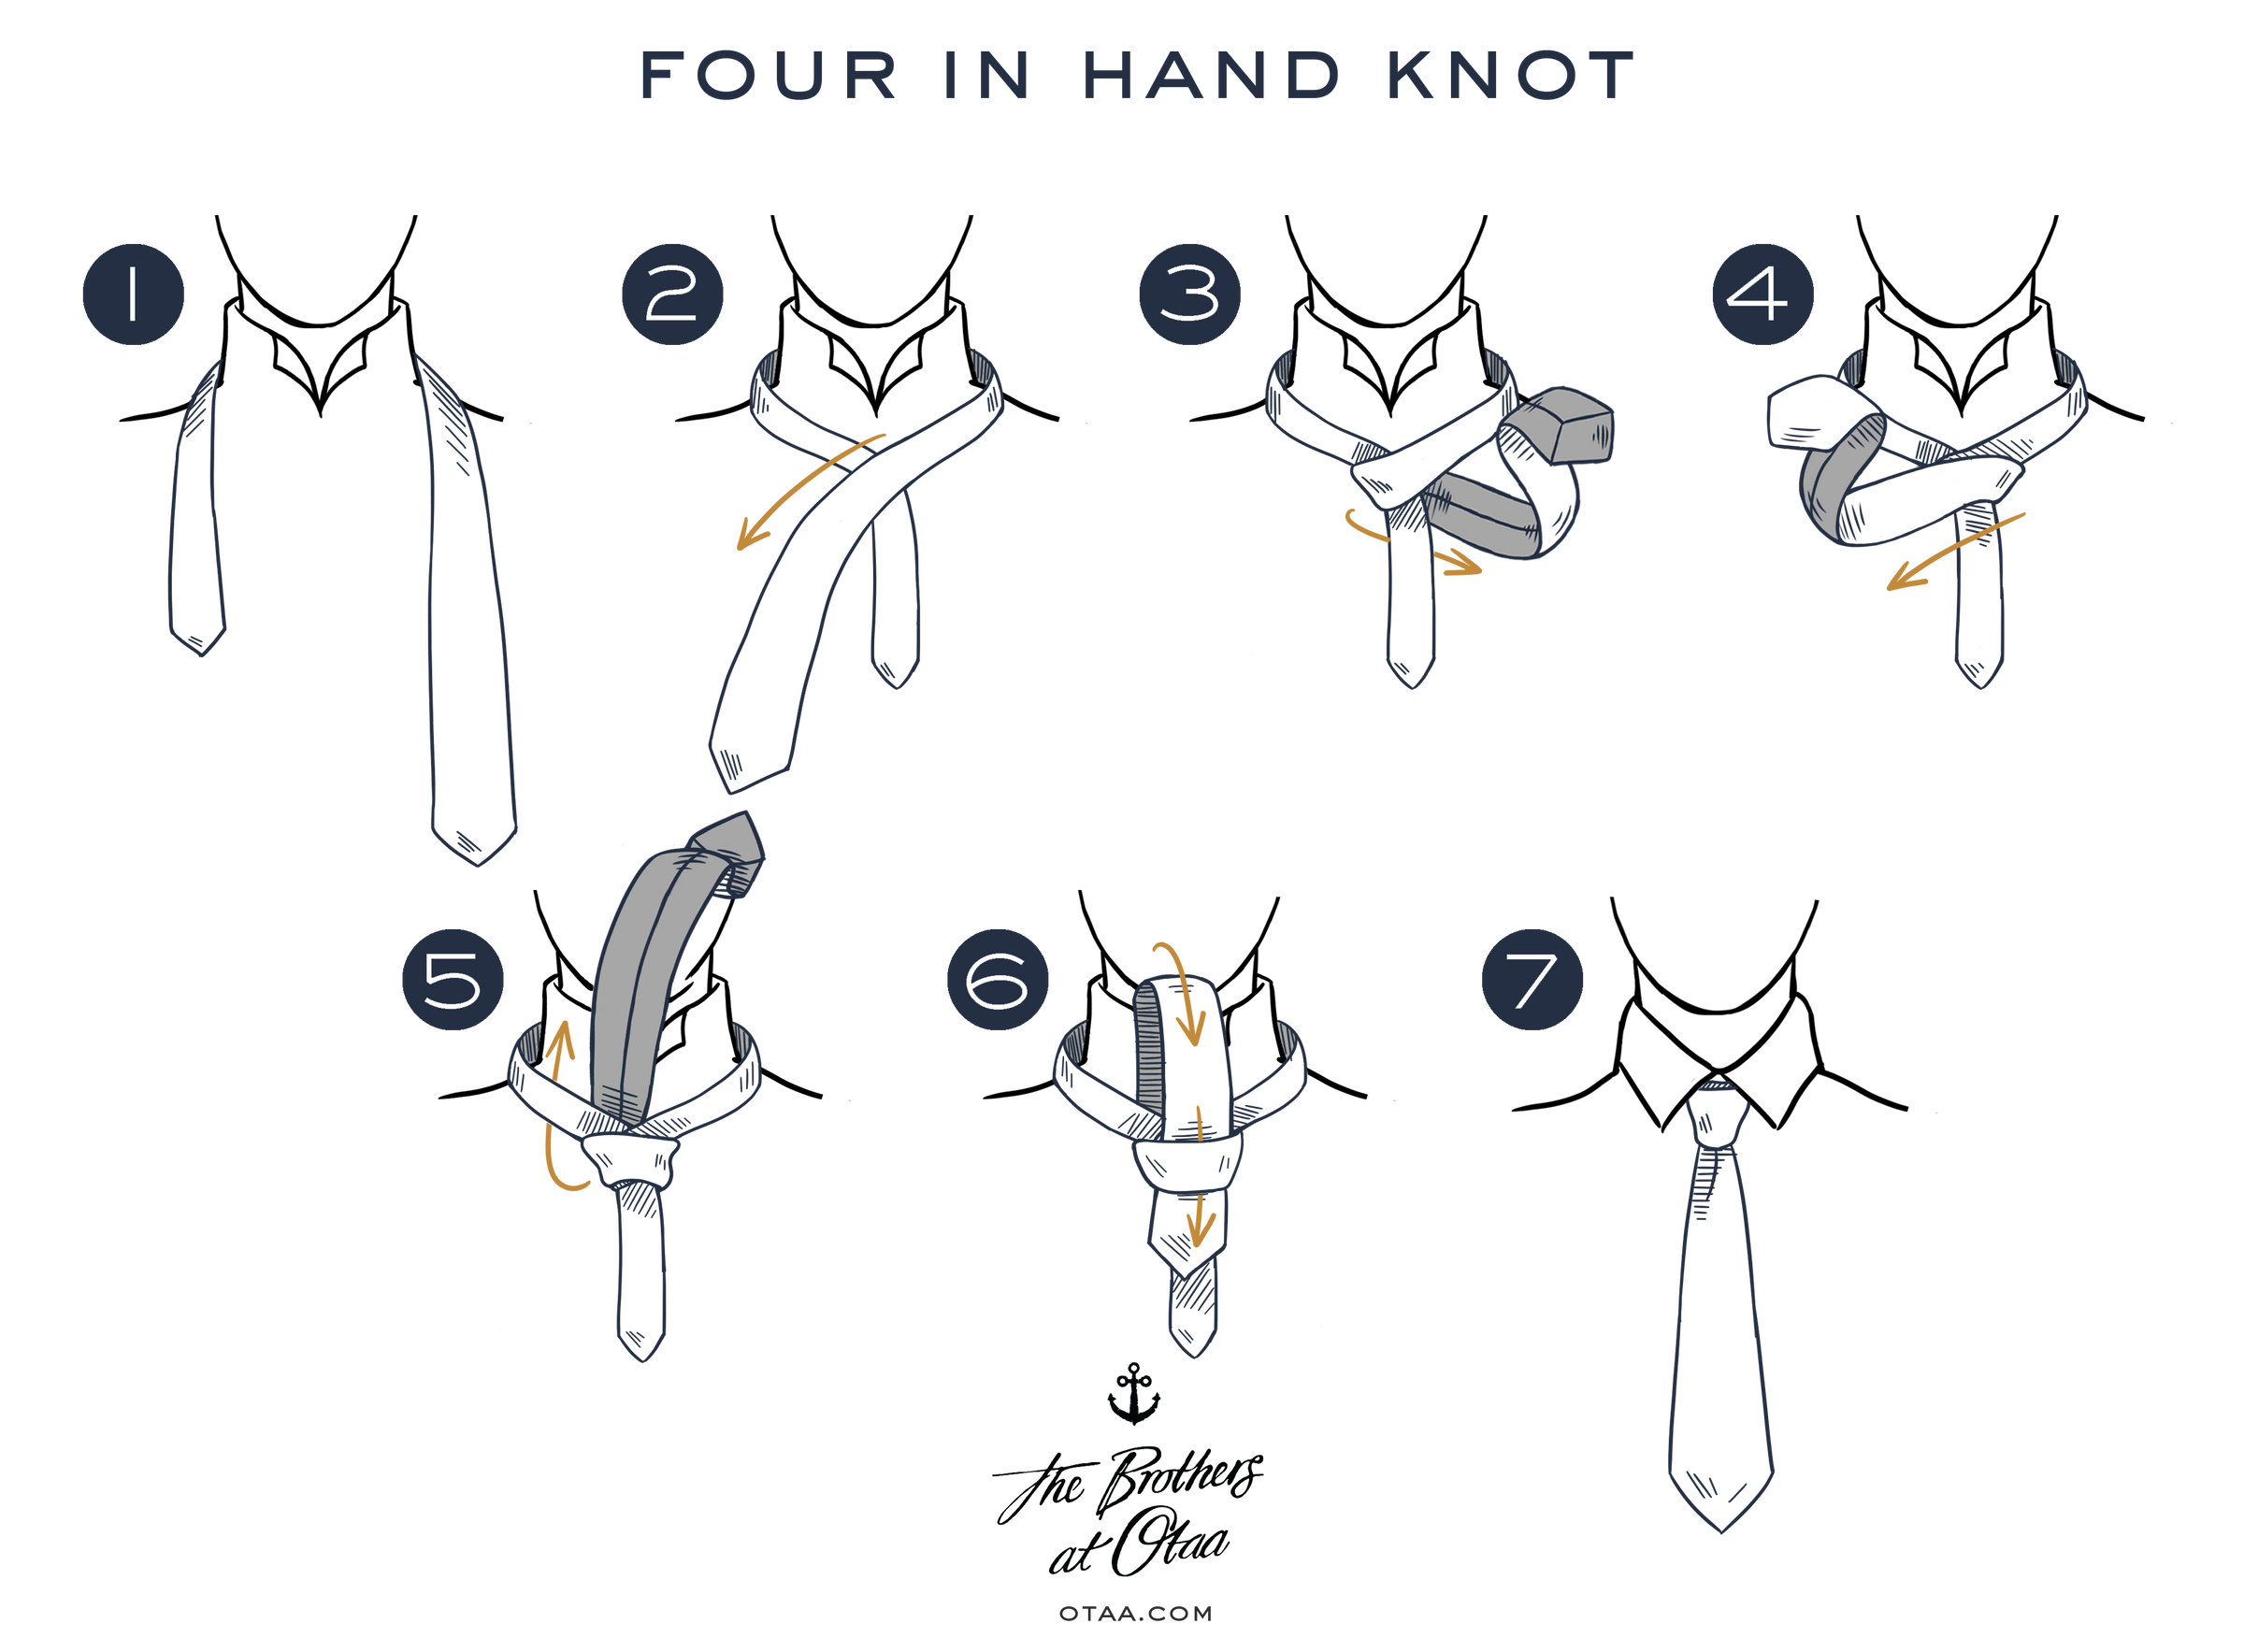 How to Tie a Four in Hand Knot - steps